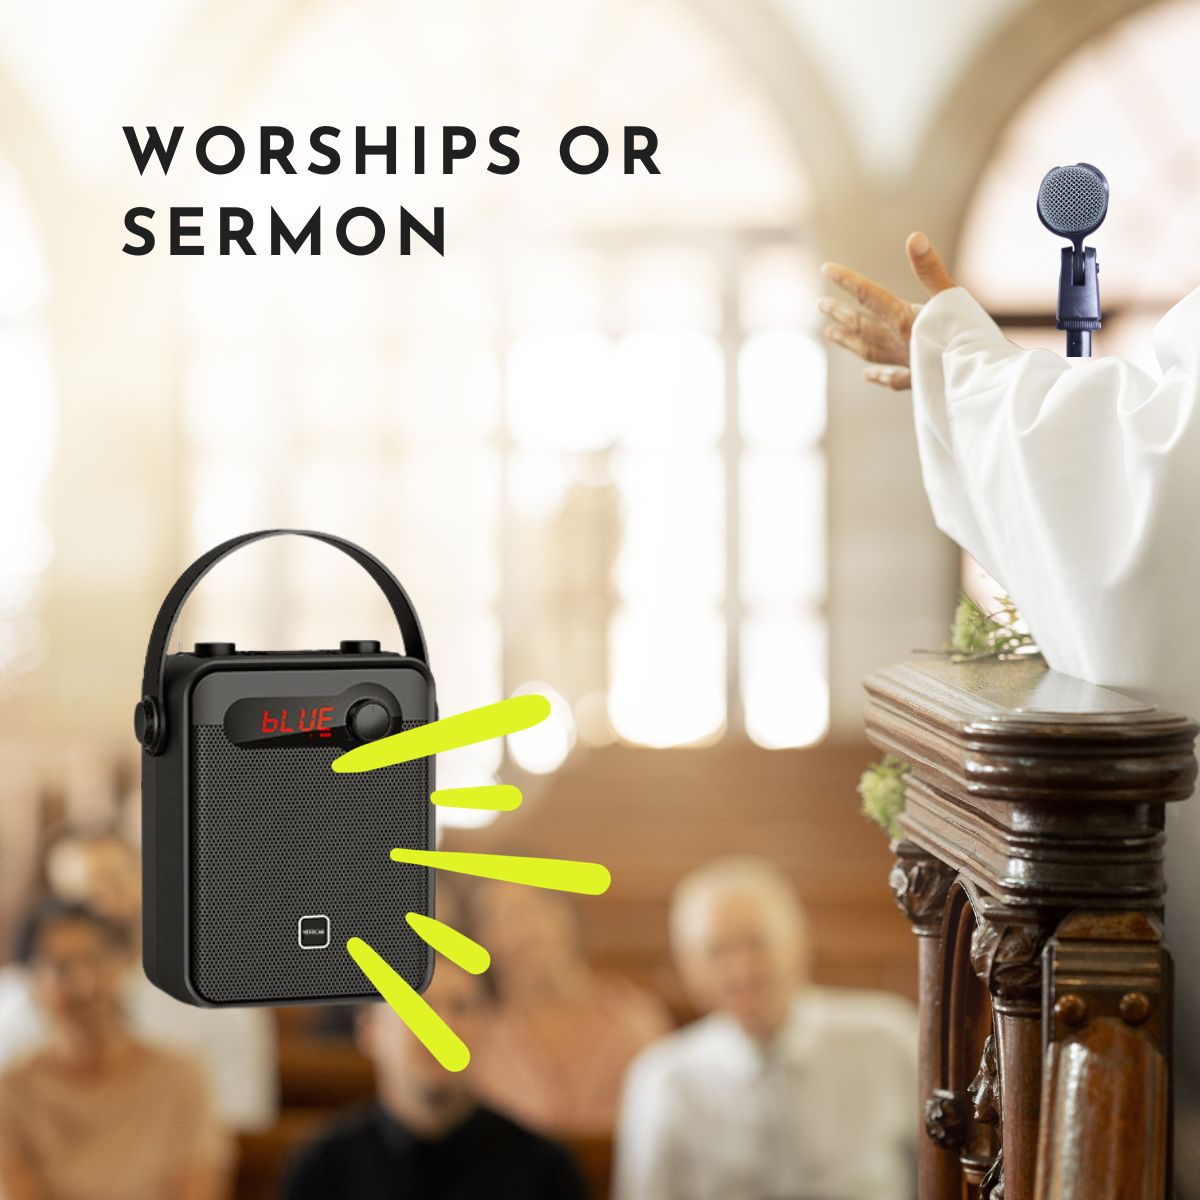 Church Speaker System with Mic for Worship Services & Sermon - Nefficar